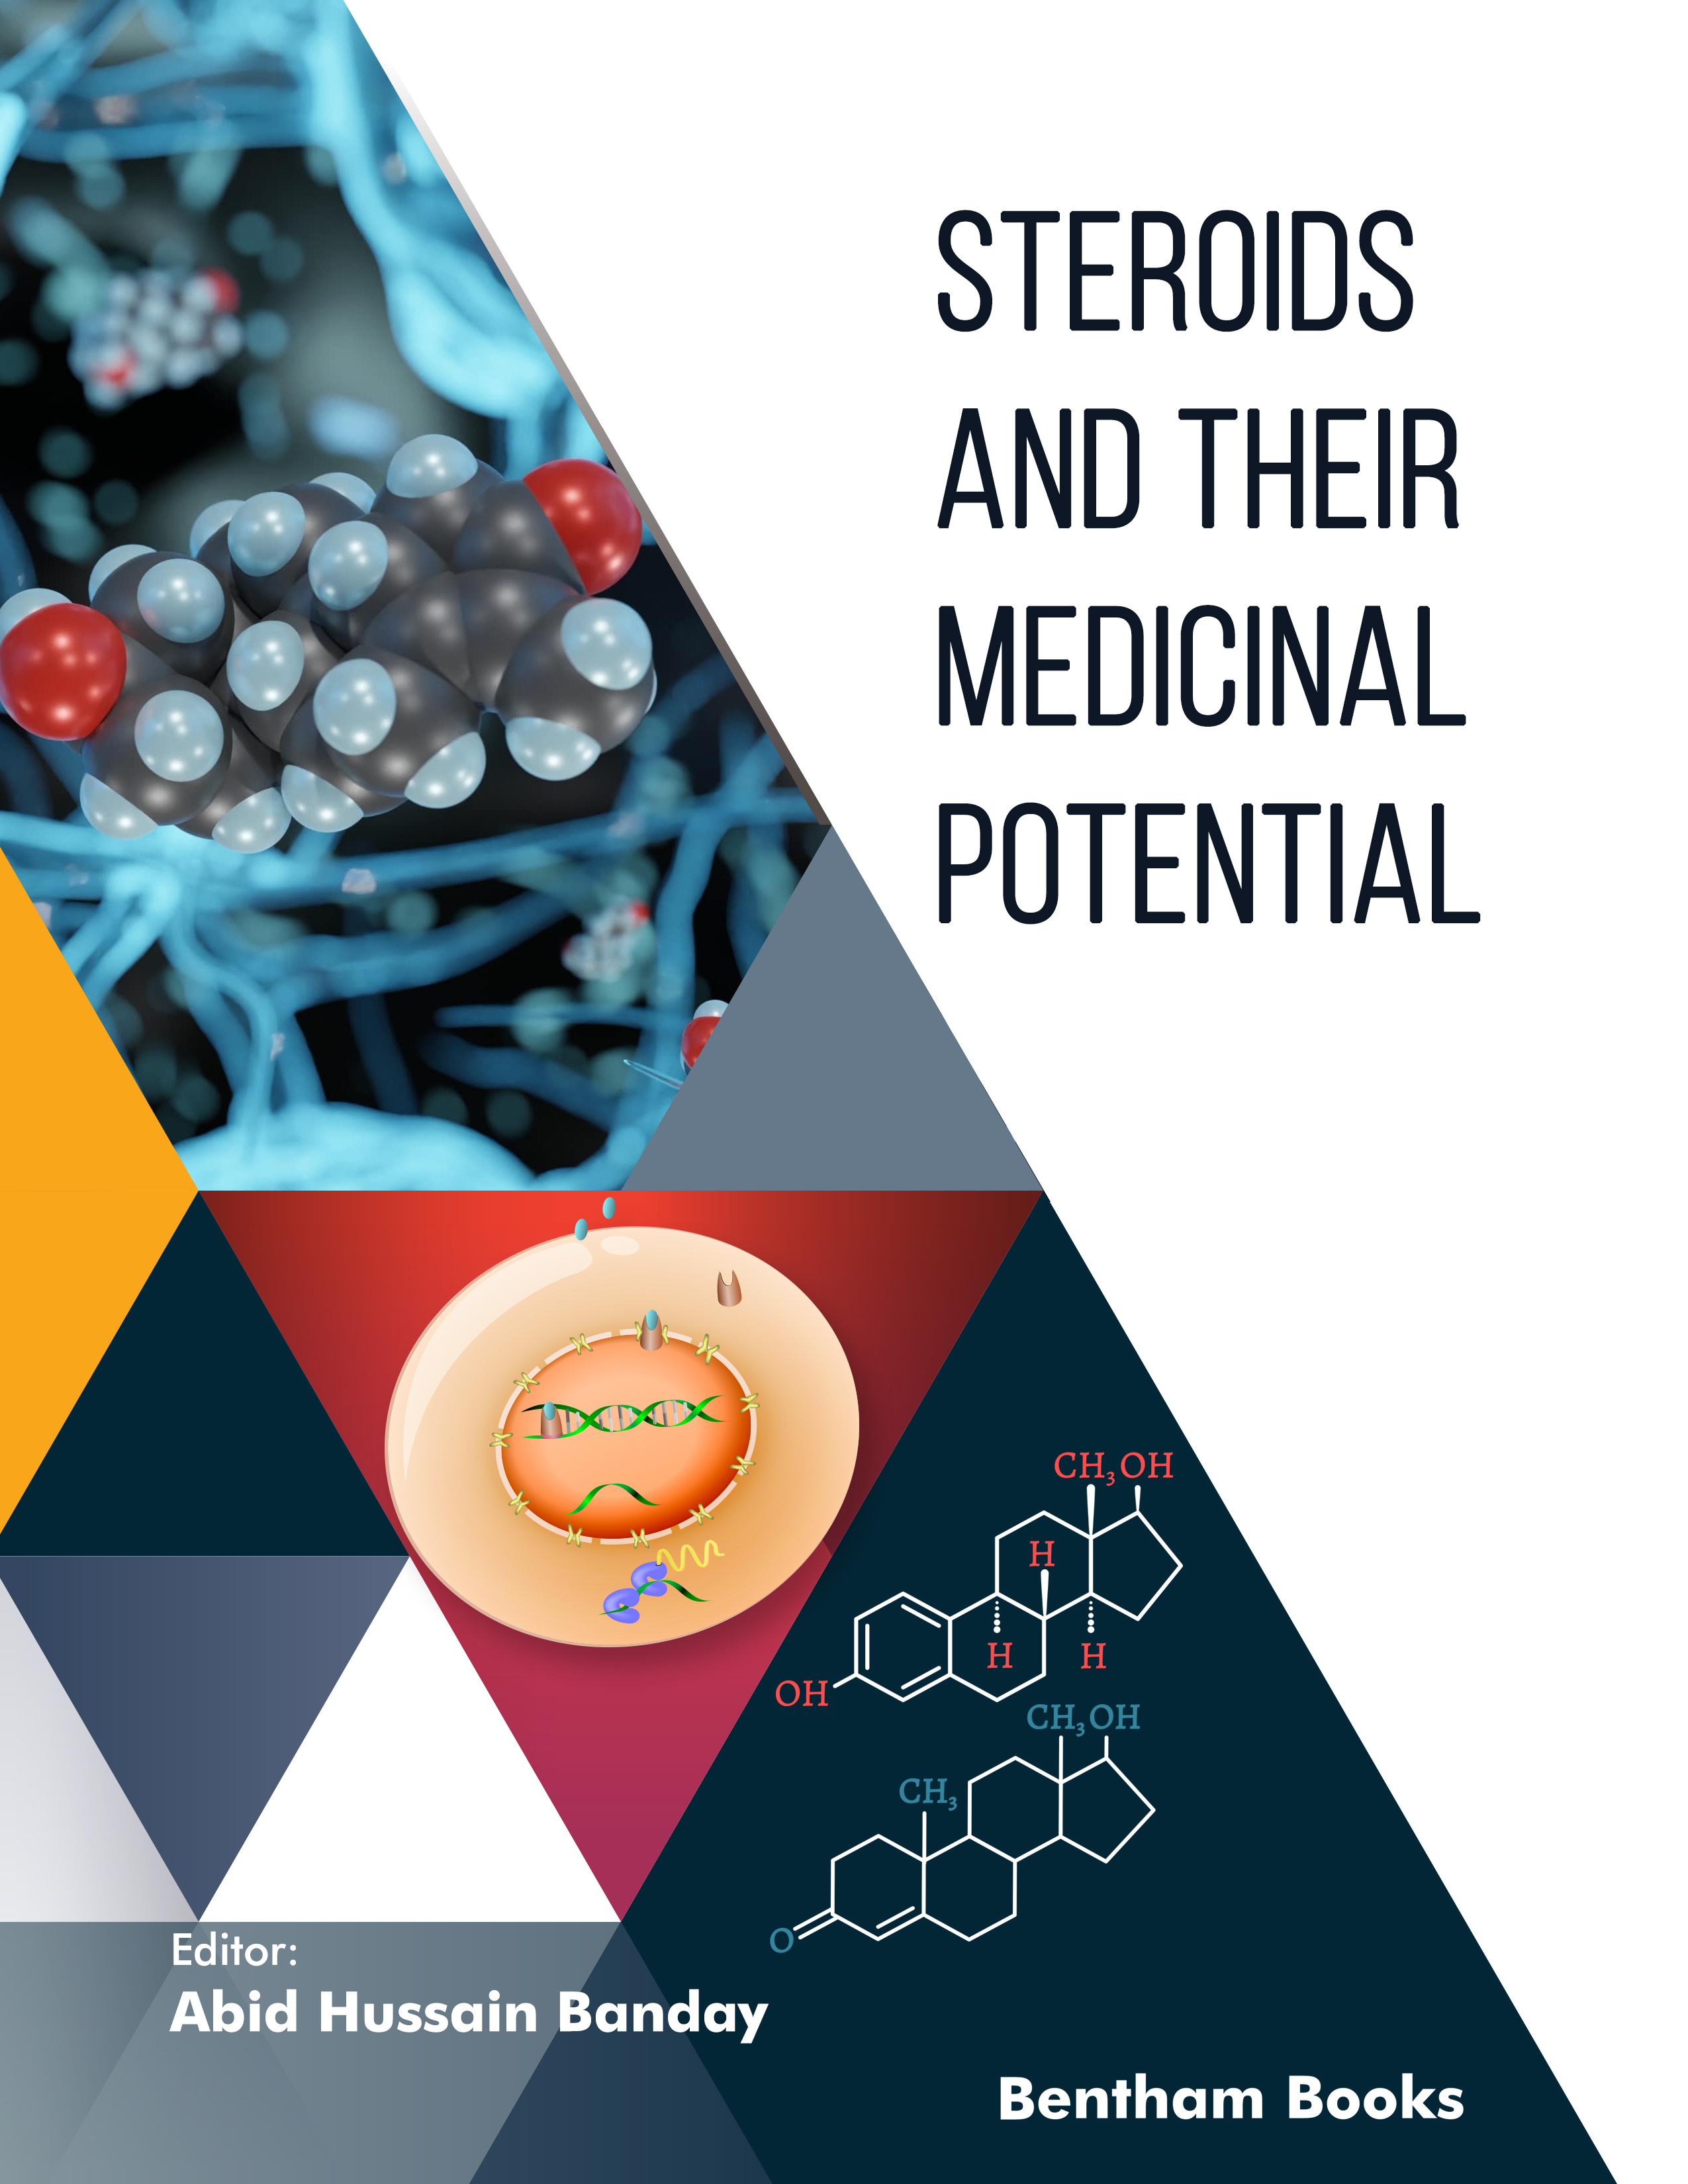 Steroids and their Medicinal Potential